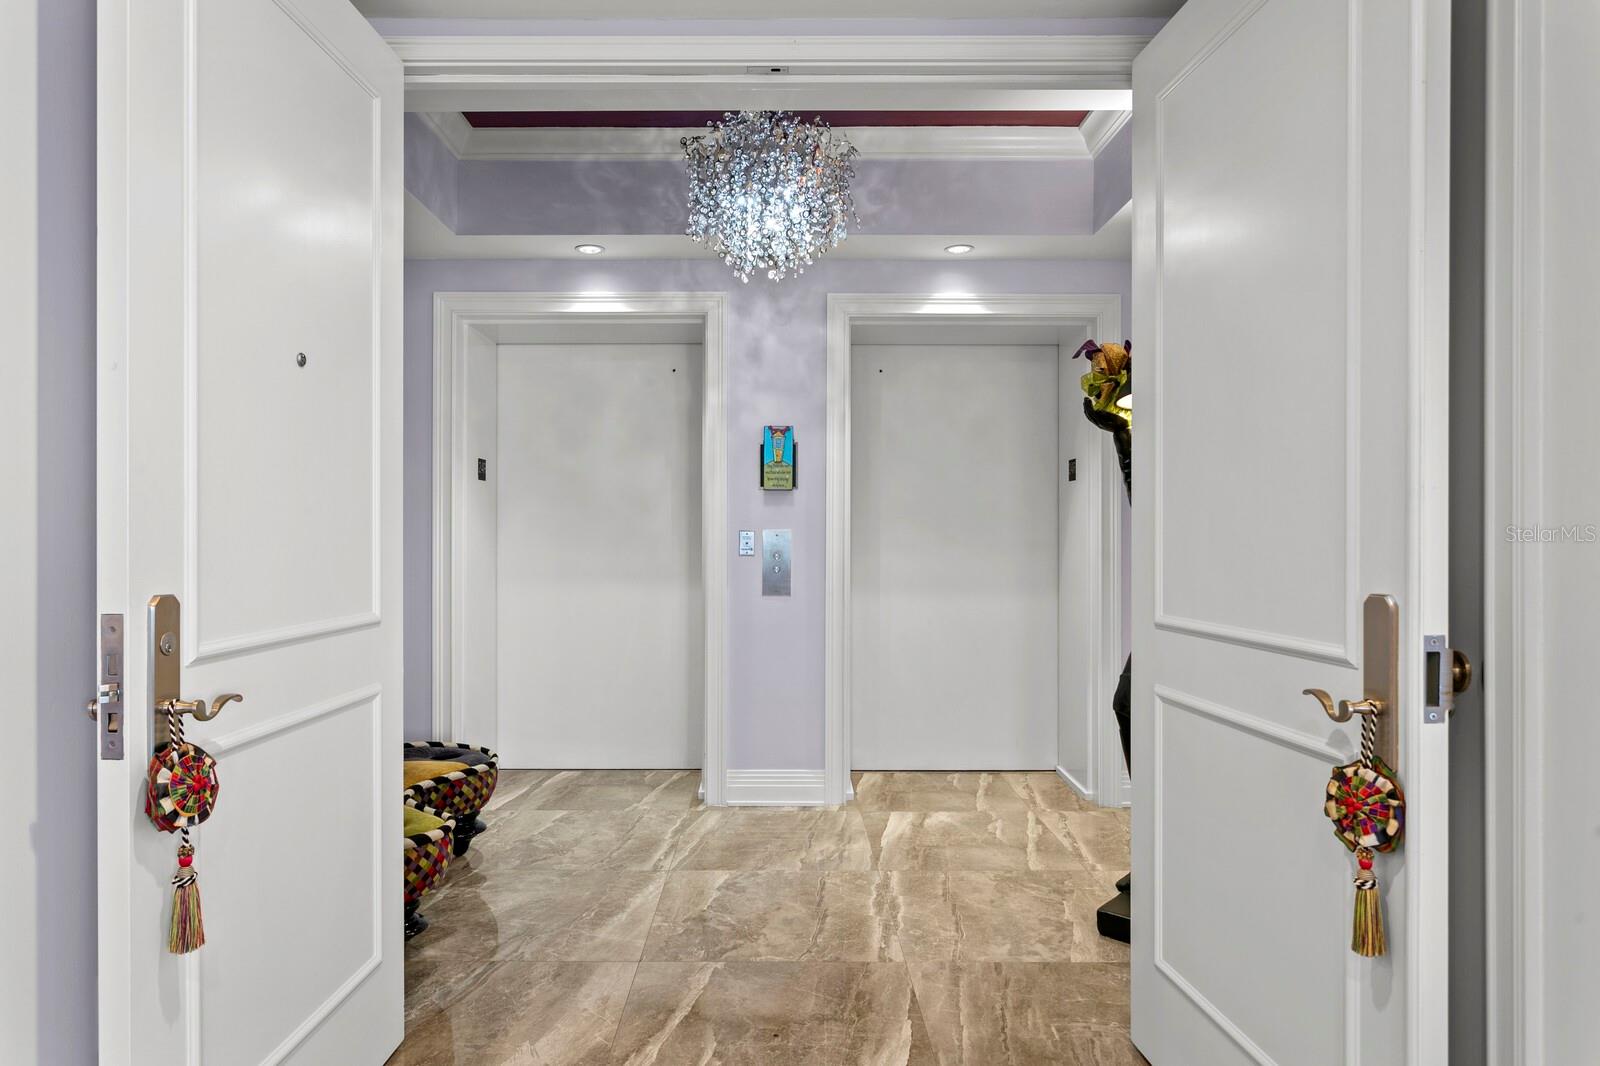 Where you have your own PRIVATE FOYER and double door entrance!